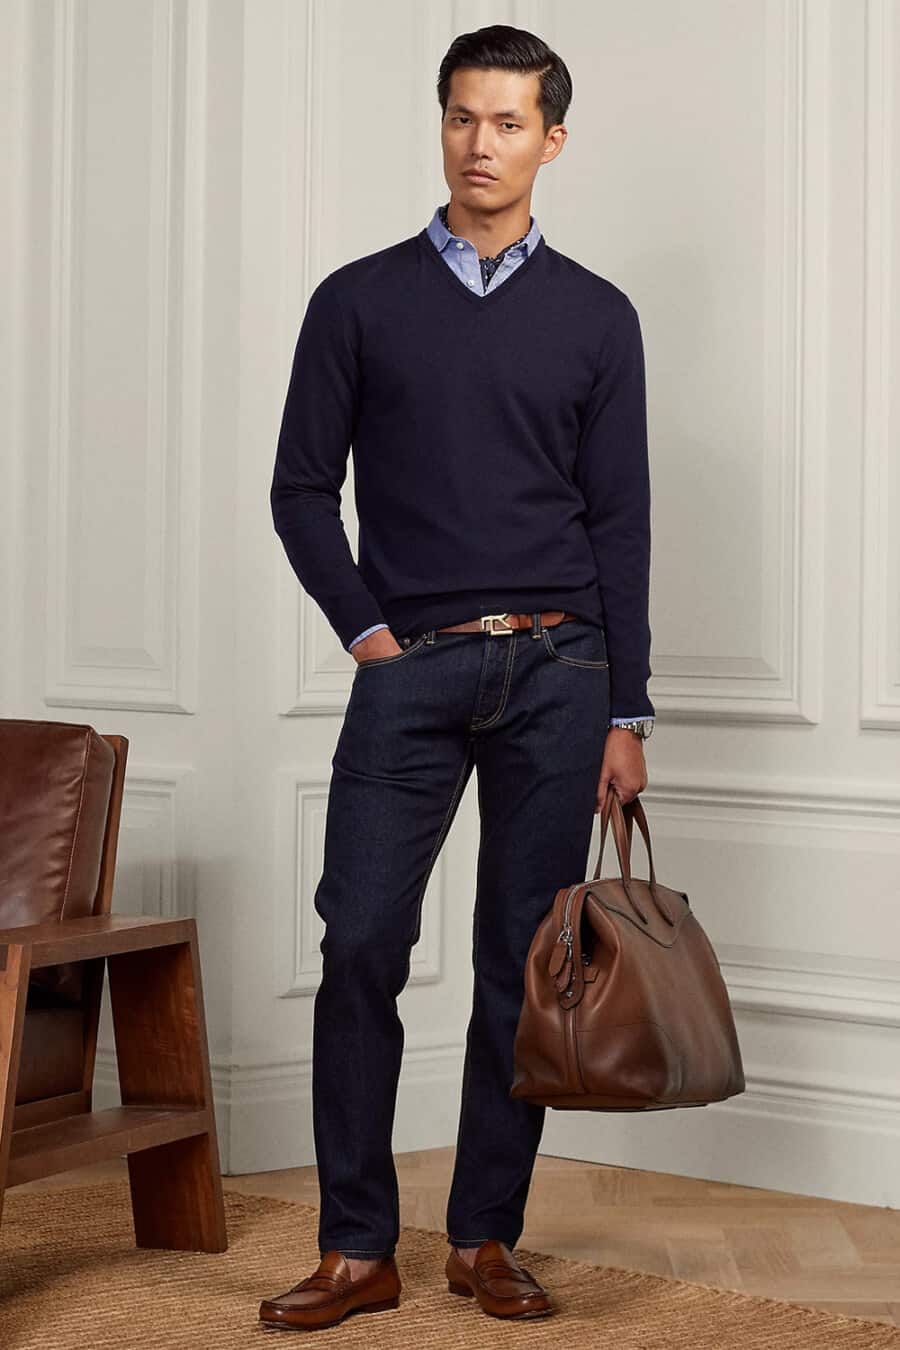 Men's dark raw jeans, light blue dress shirt, v-neck navy sweater, tan leather belt, tan penny loafers and brown weekender bag outfit